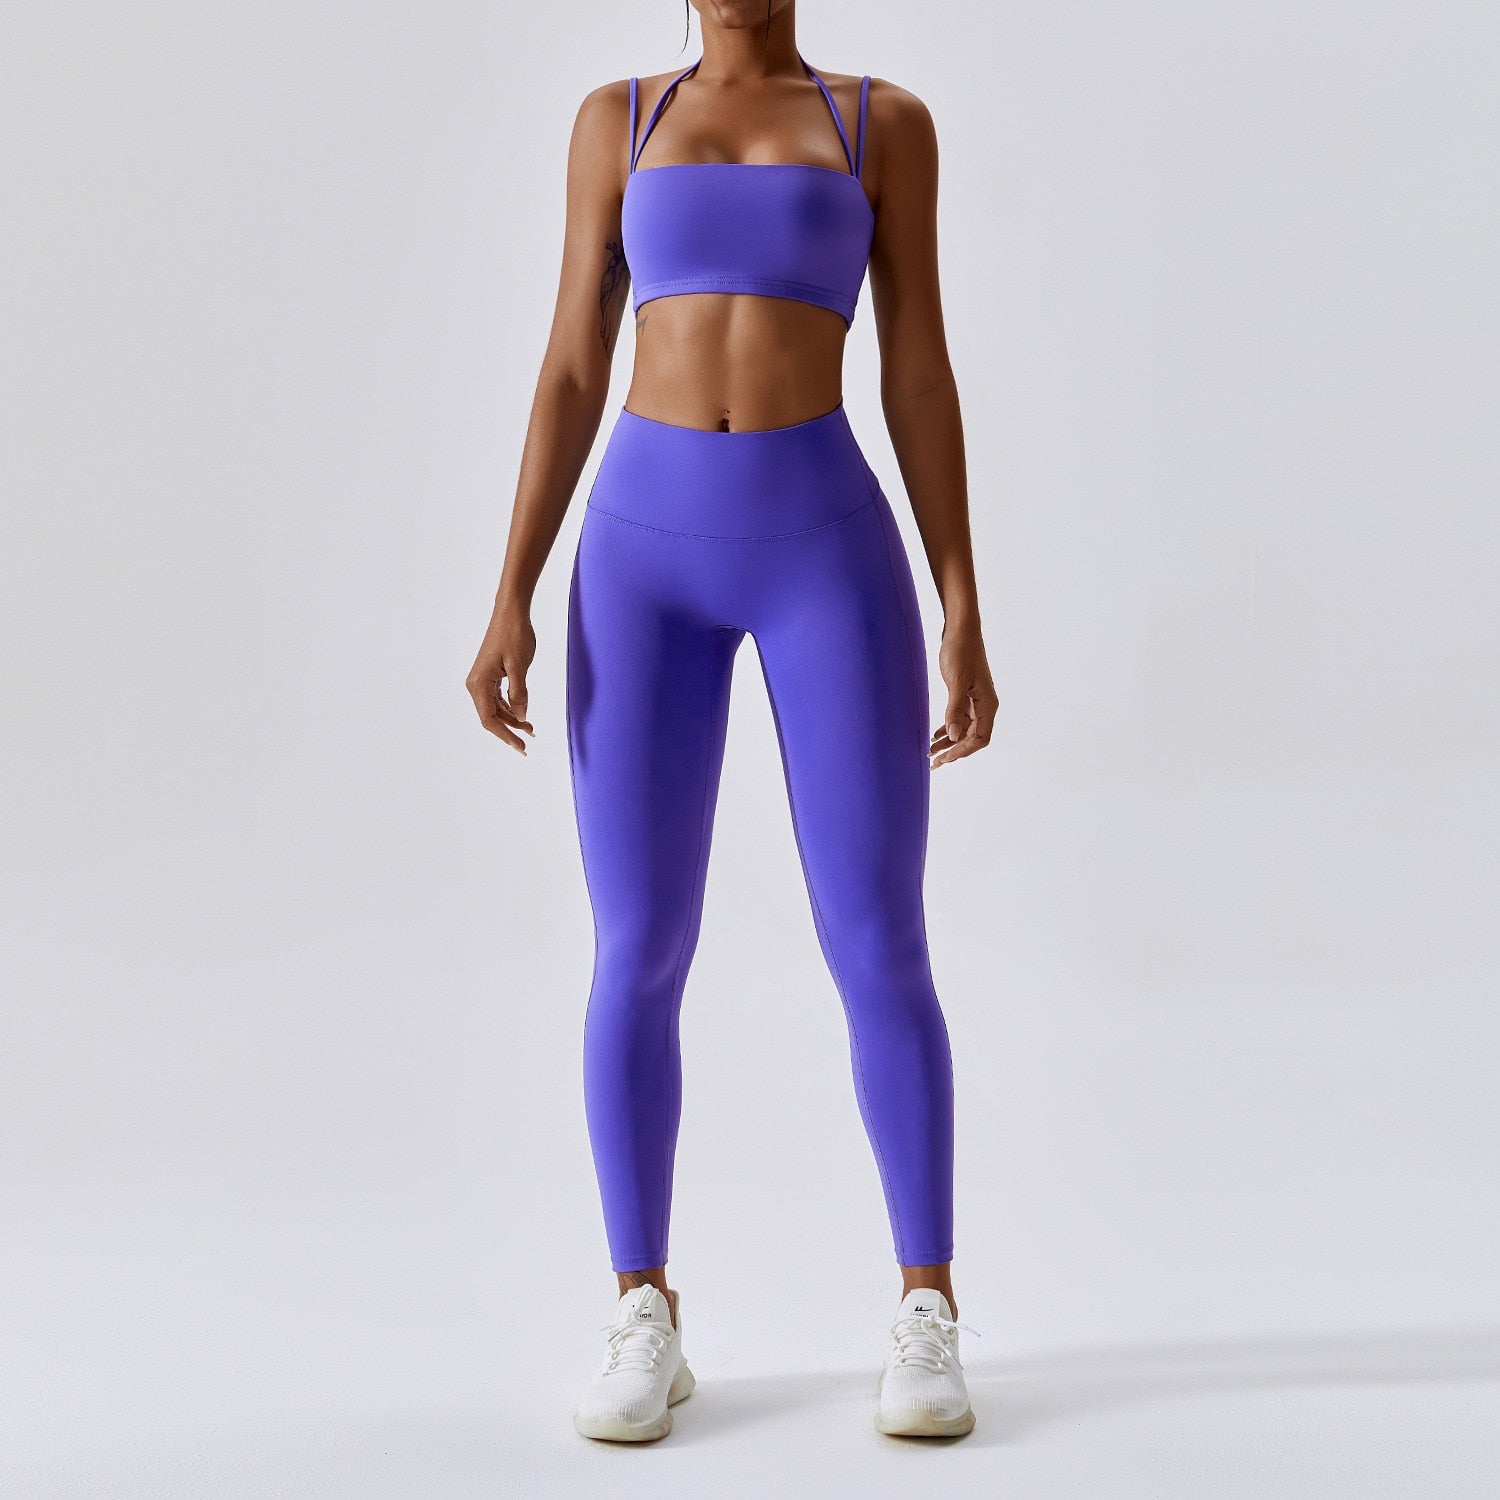 Yoga Clothing Sets Athletic Wear Women High Waist Leggings And Top